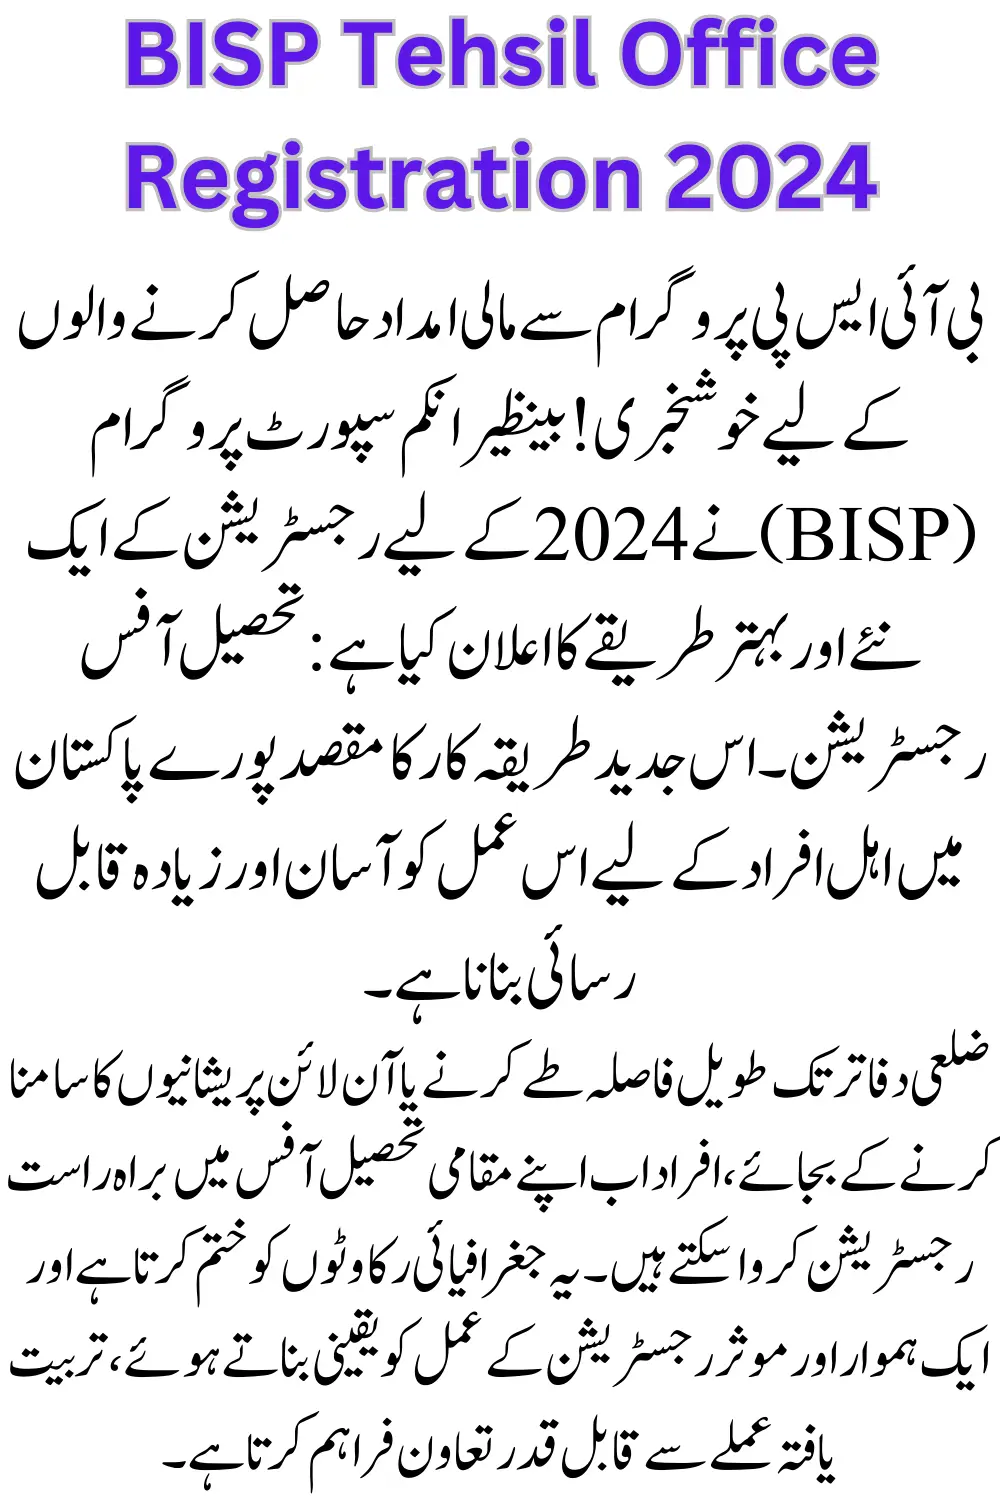 Government Announces BISP Tehsil Office Registration 2024 Start With New Method